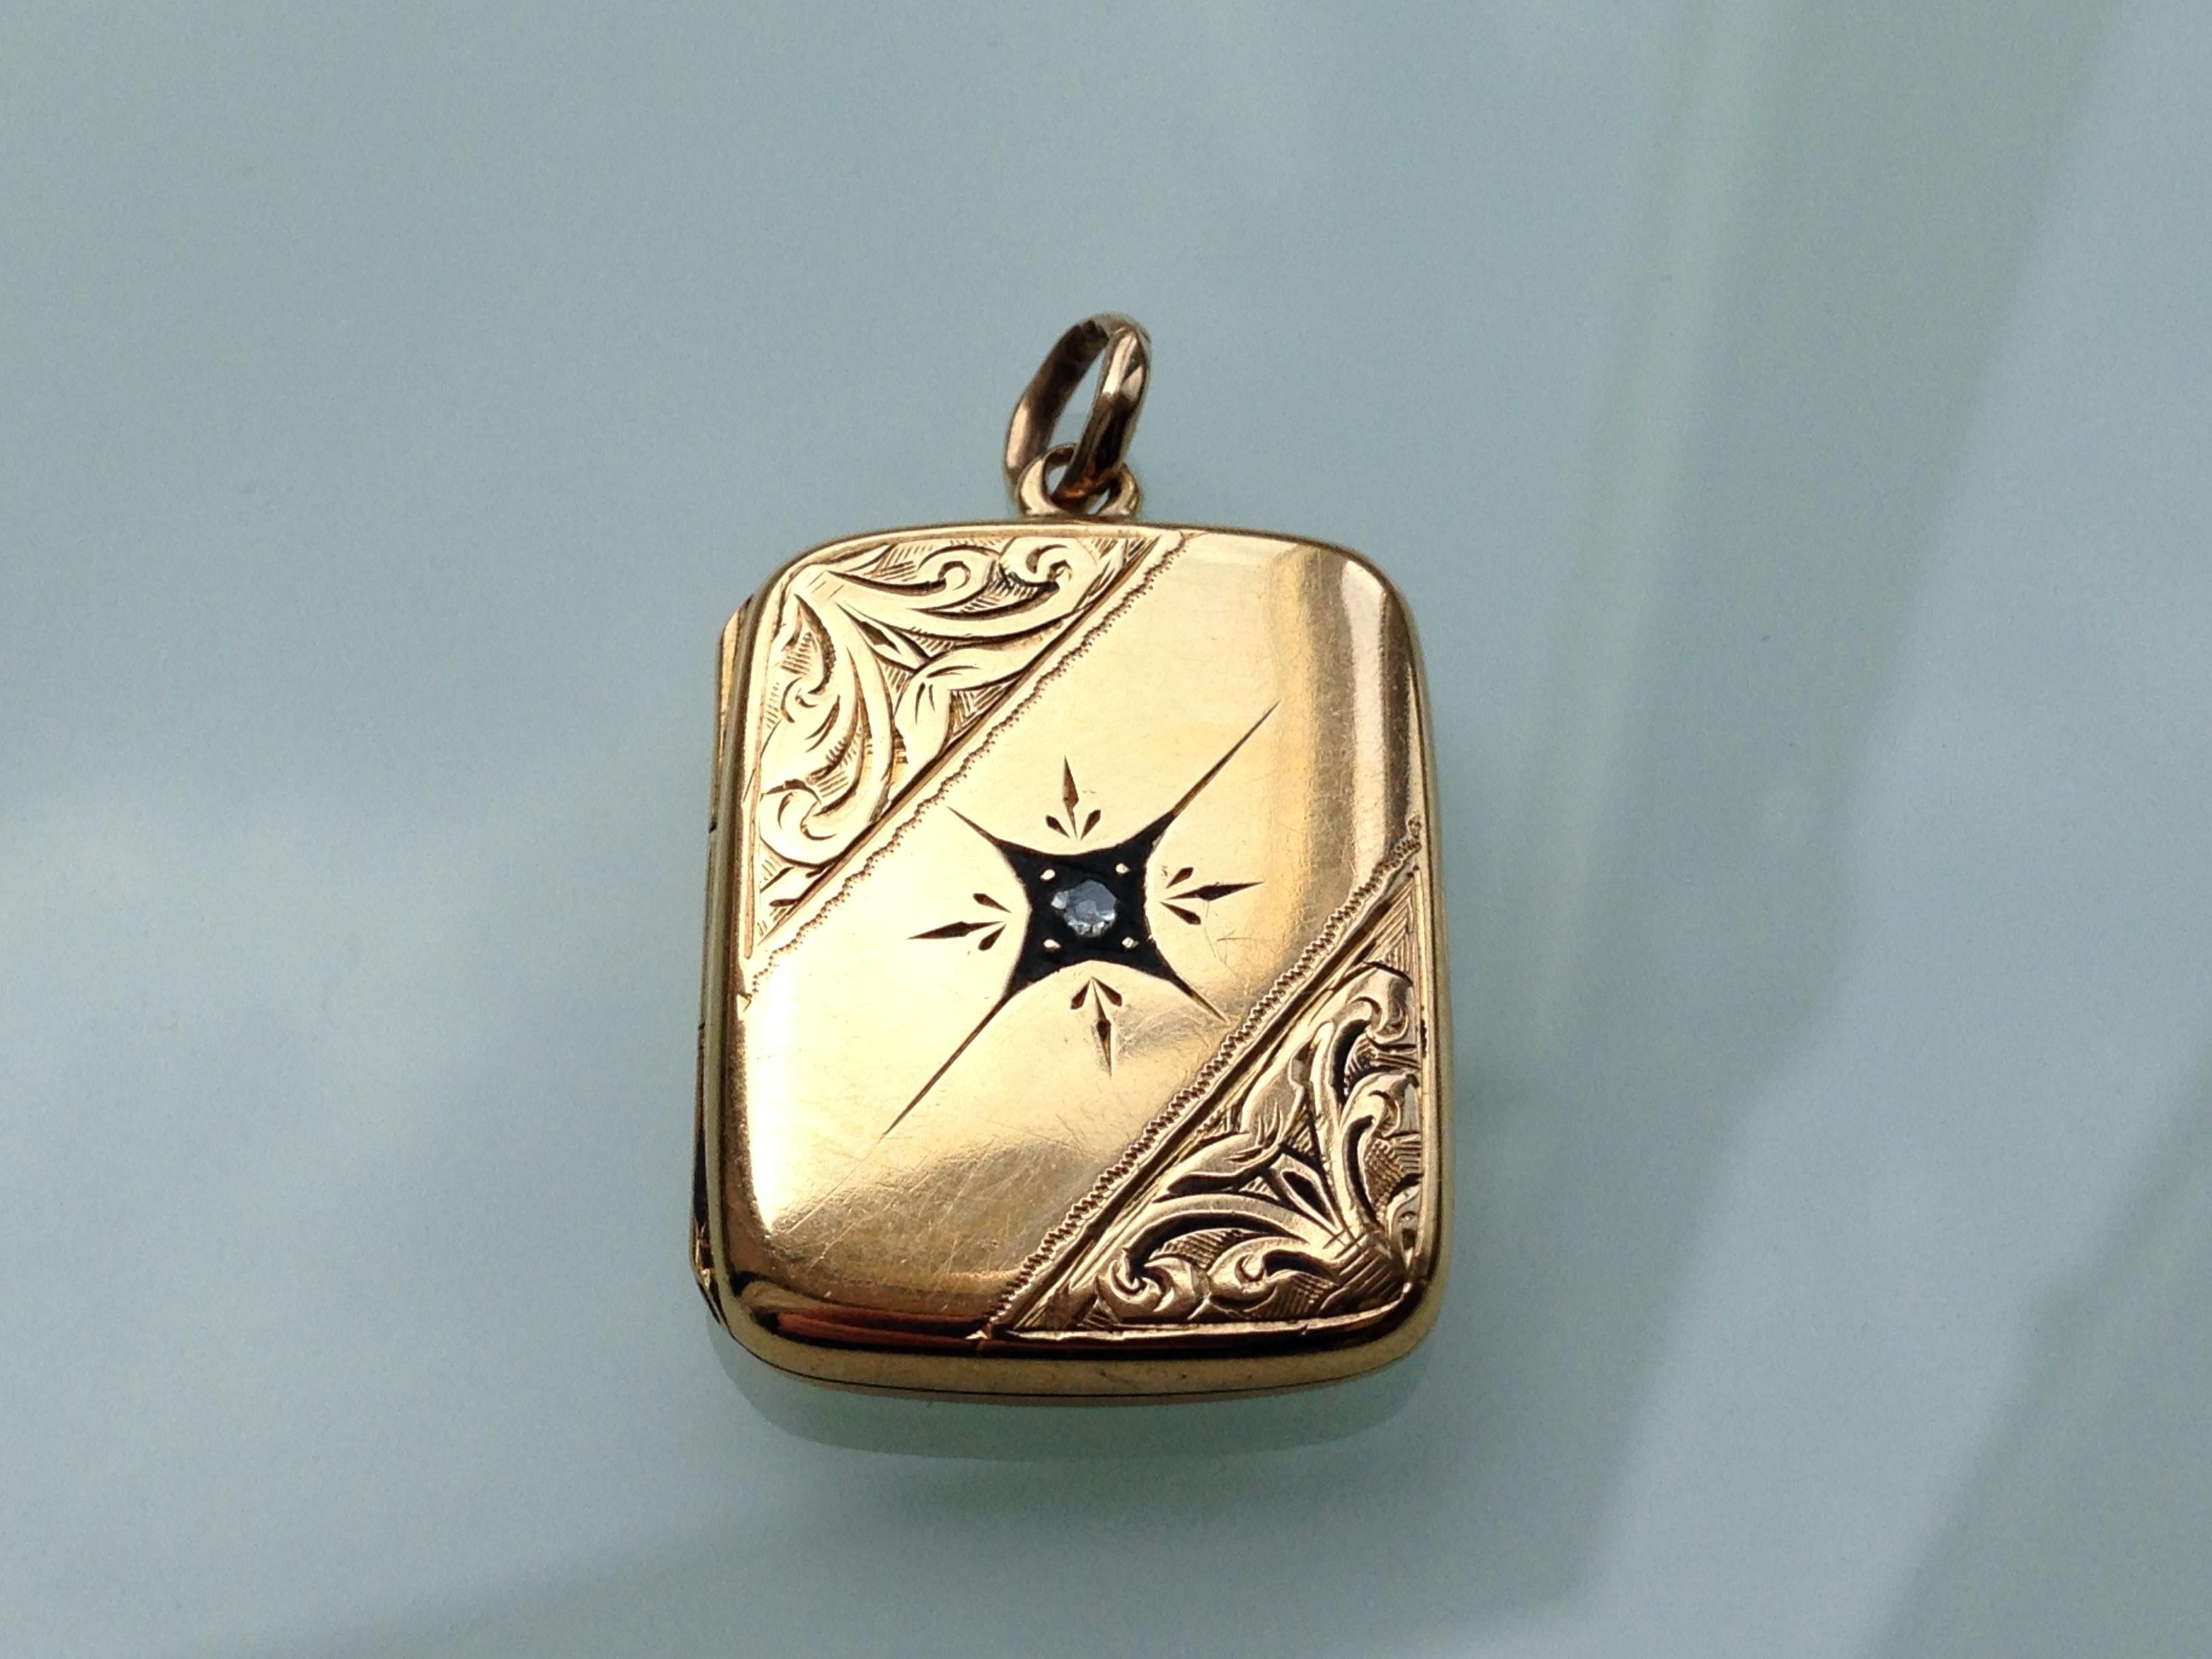 15ct 625 Gold Art Deco Locket
with scrolled design to front .
with its beautiful original mine cut natural diamond 
Backed rose gold back
Hallmarked by Chester Assay 1907
